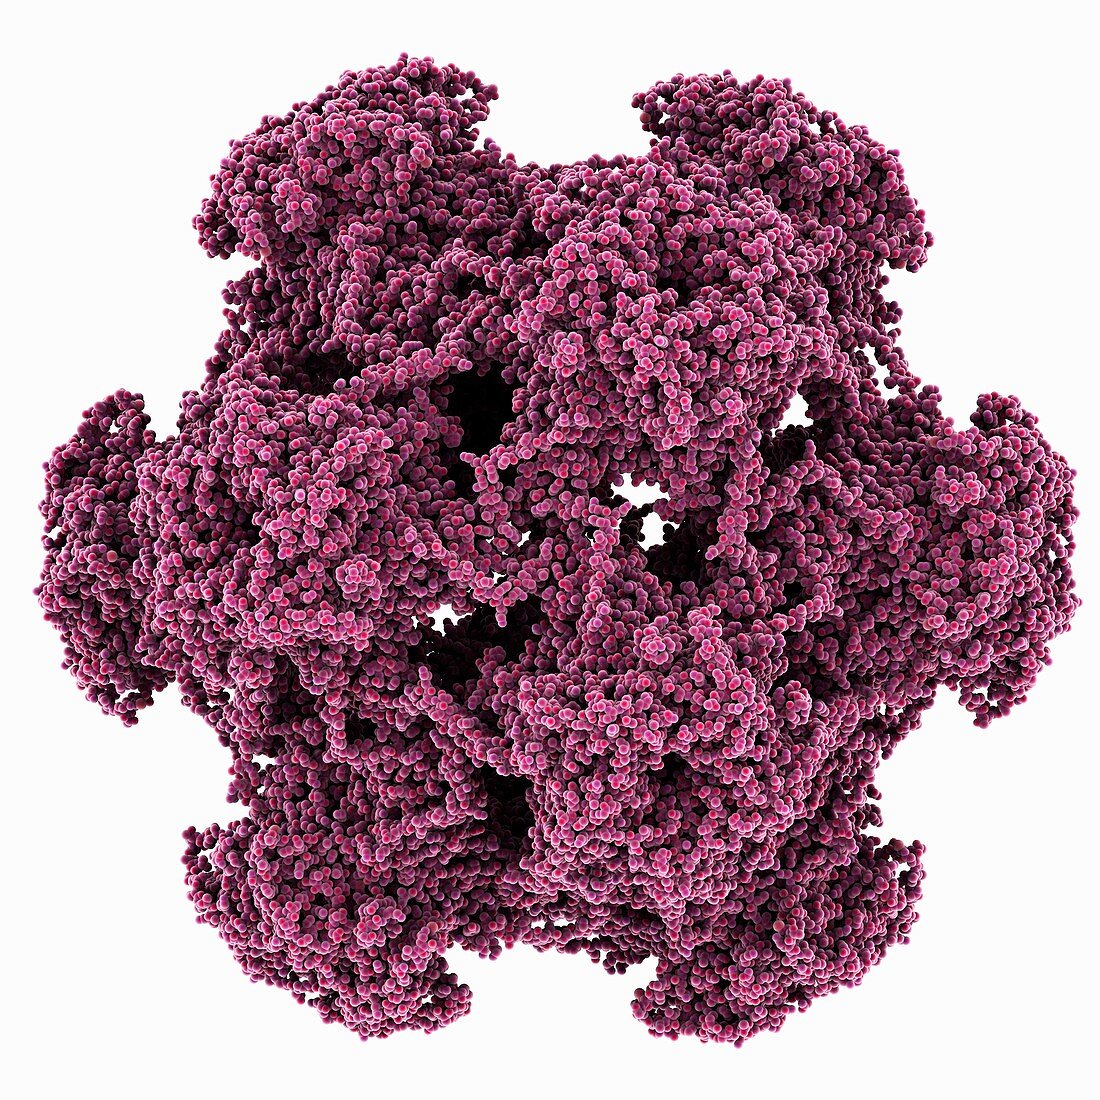 HPV L1 surface protein